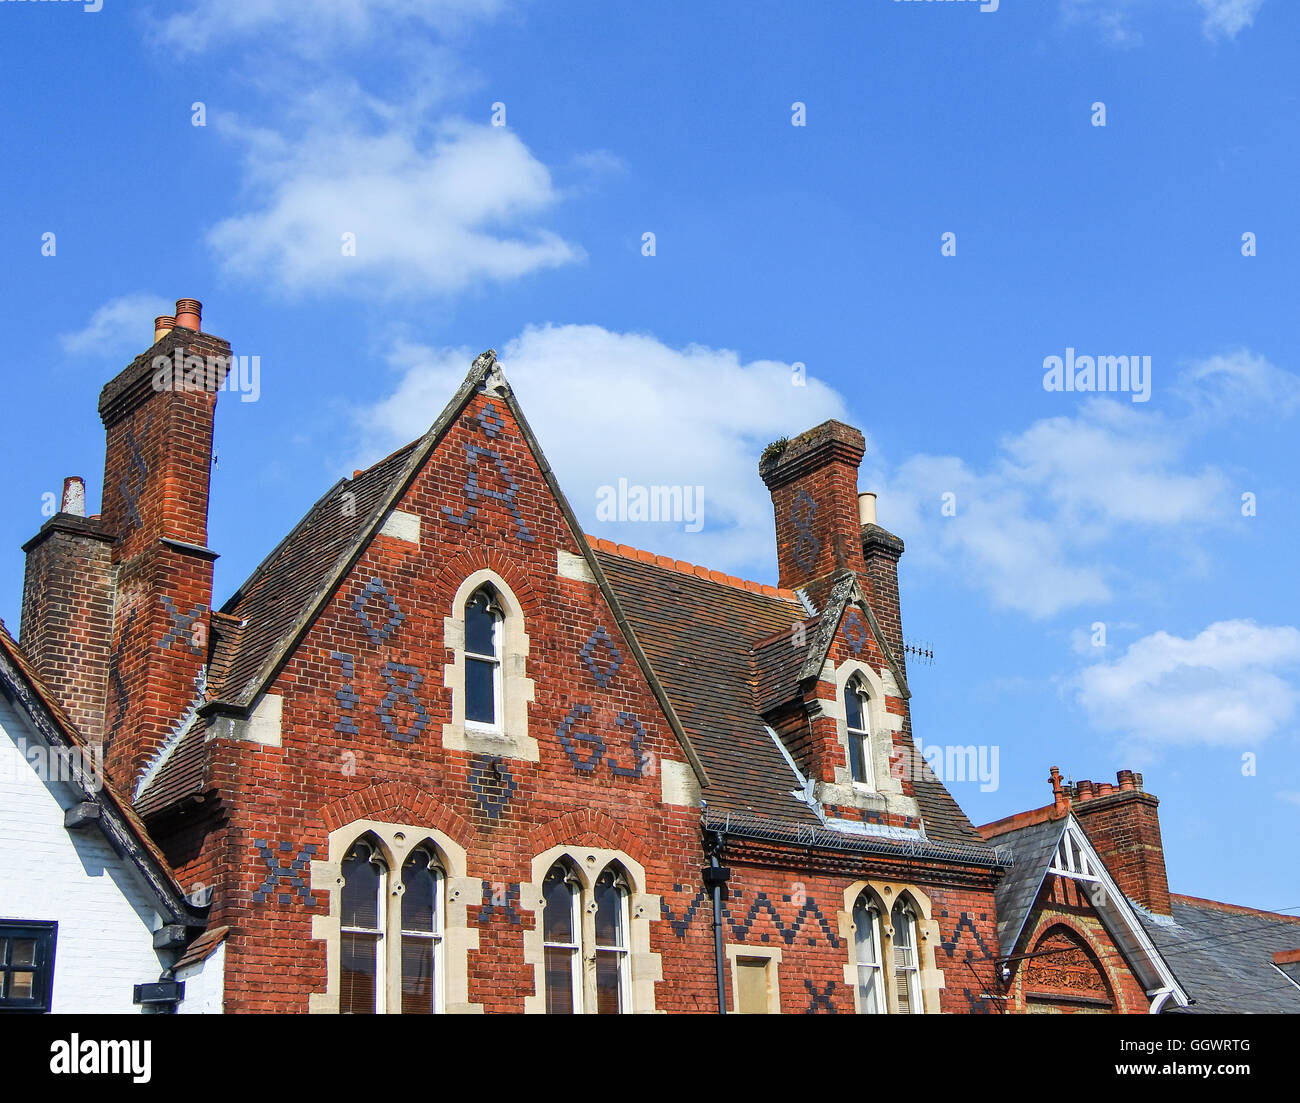 A former dwelling, now with shop front to ground floor - built in 1863 of Victorian Gothic architecture Stock Photo